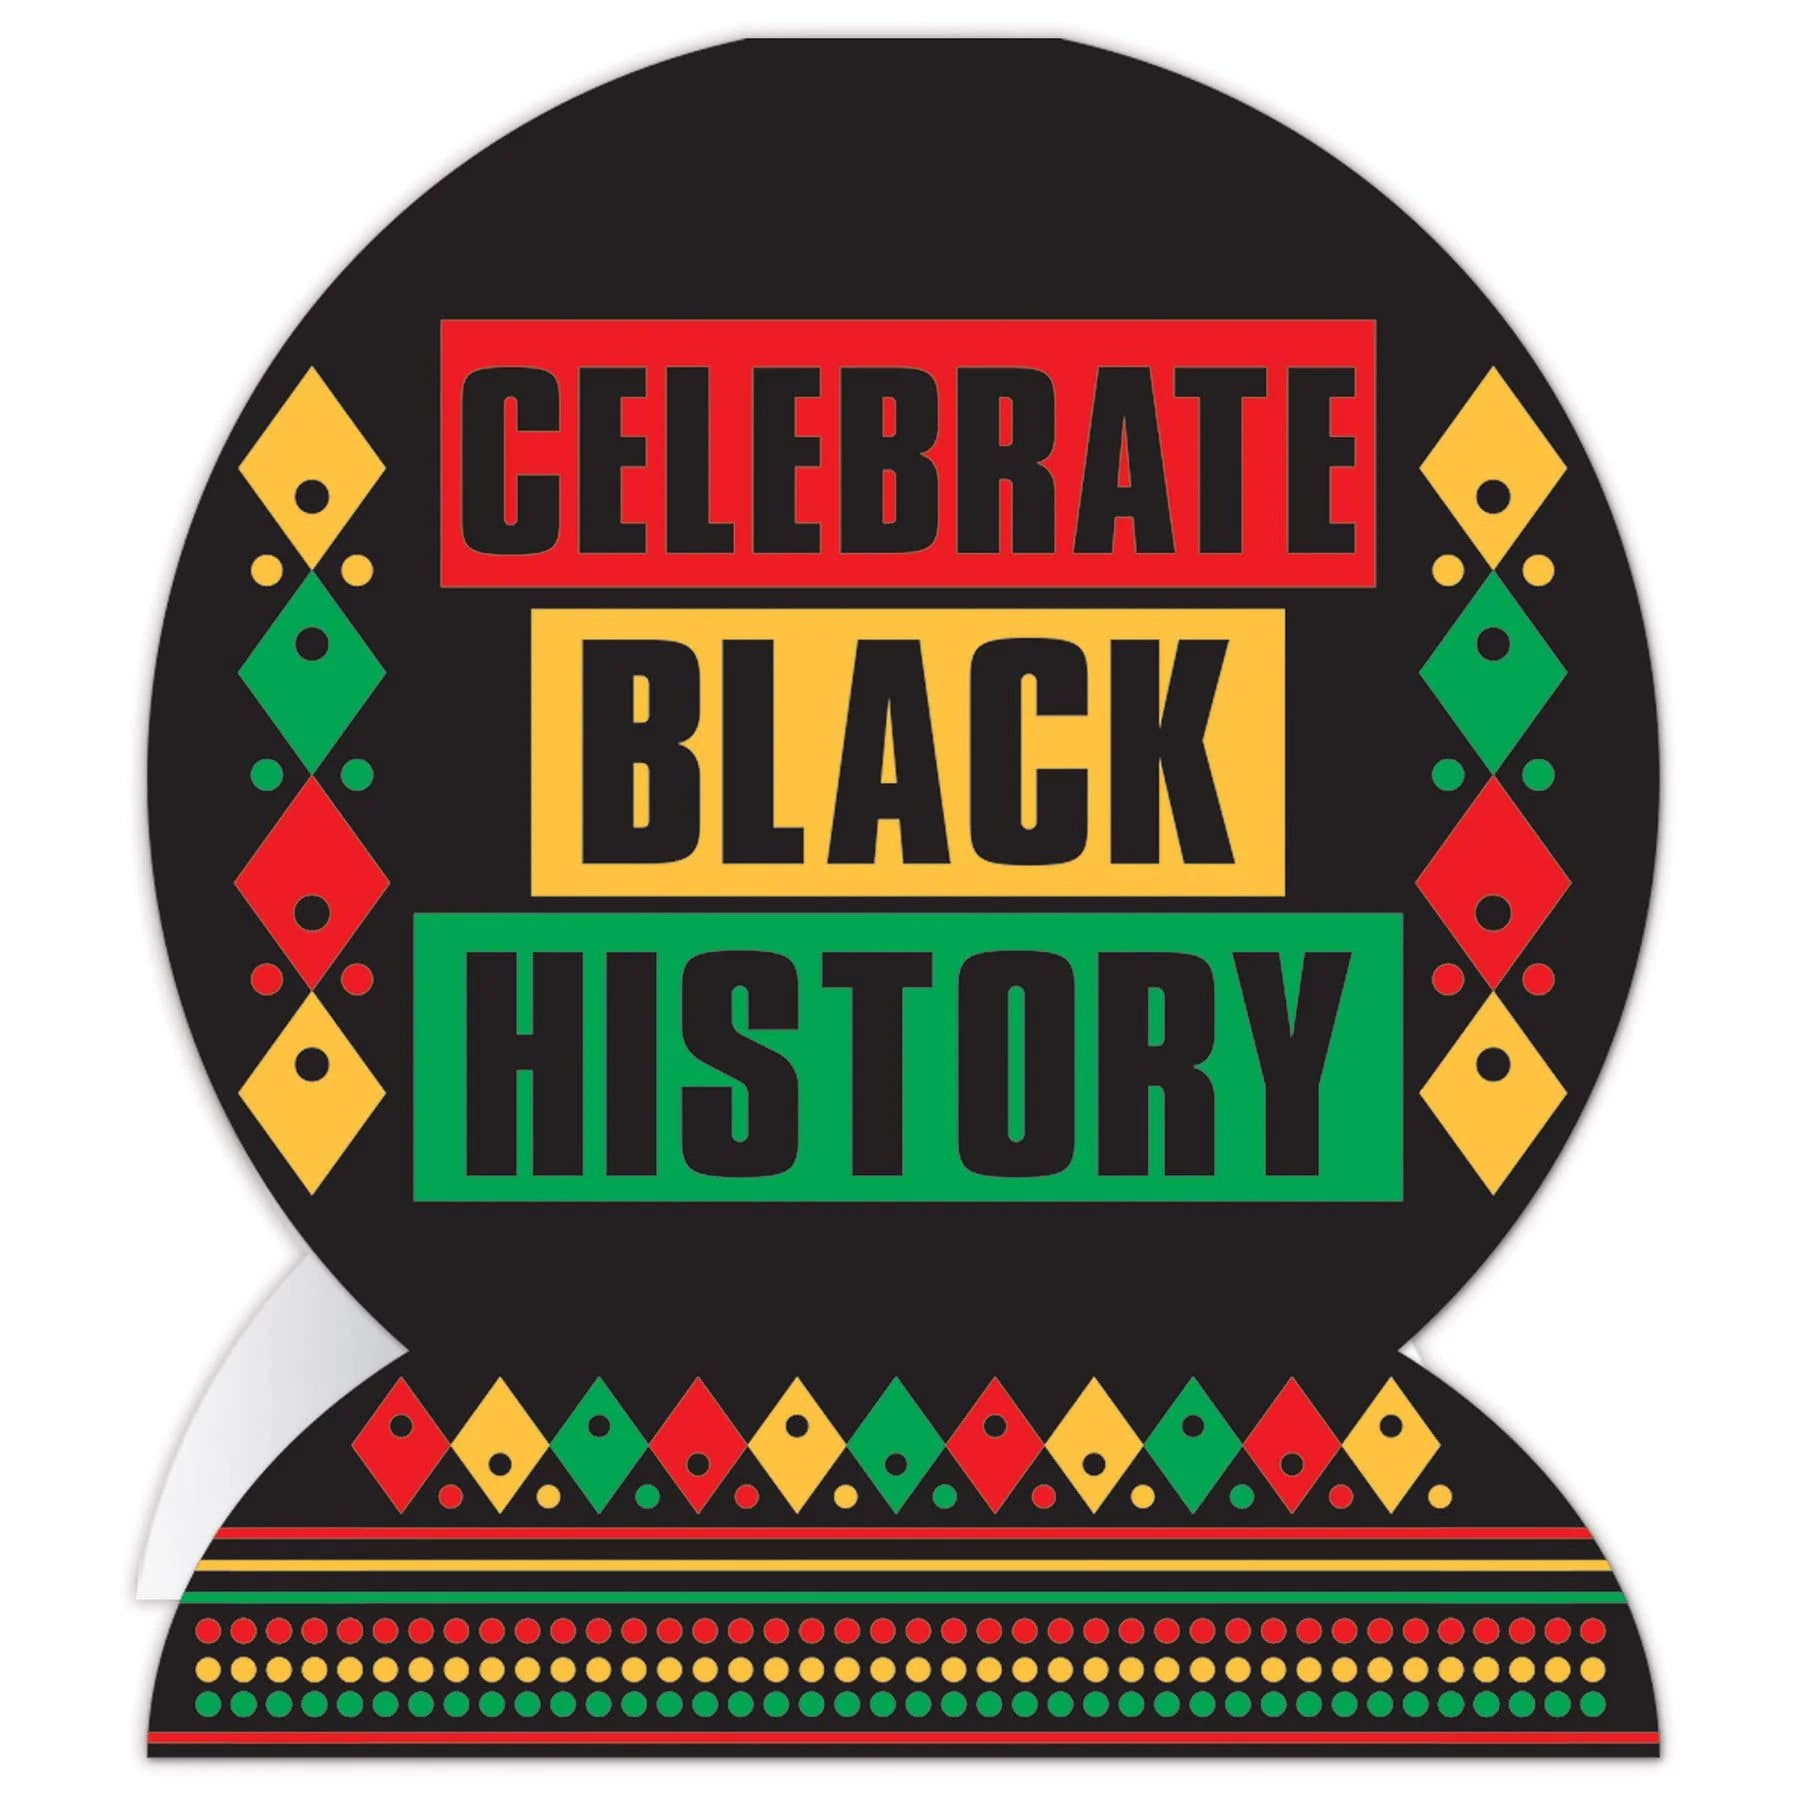 Black History Month Decorations: Celebrate with Vibrant Garlands, Signs & More